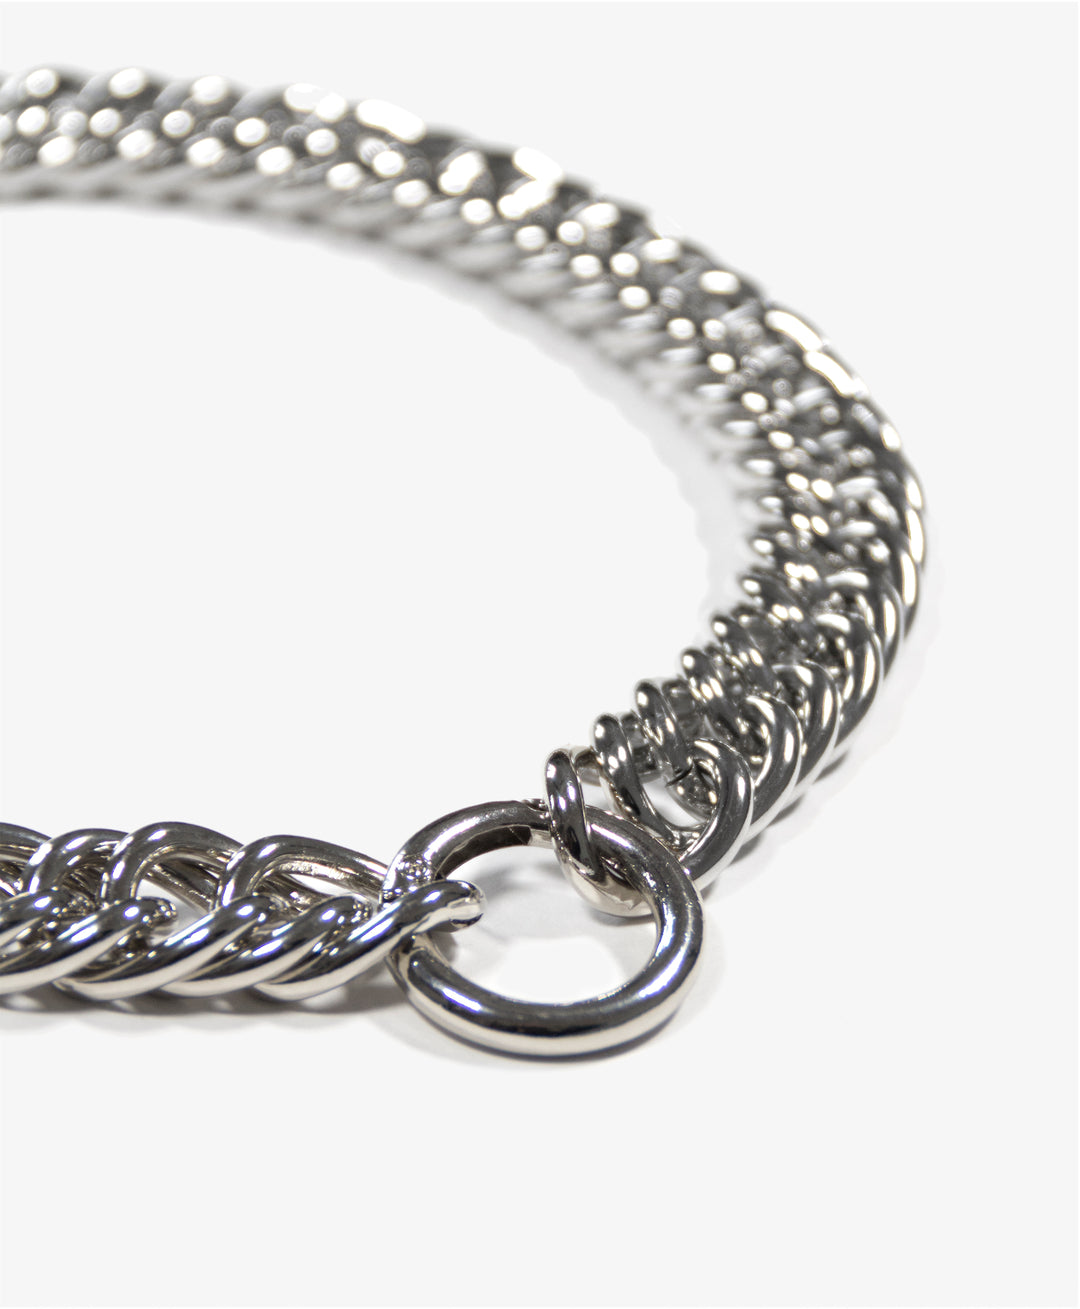 llayers-mens-women-jewelry-silver-stainlesssteel-choker-chain-necklace-unchained-006-Brooklyn-New-York-3